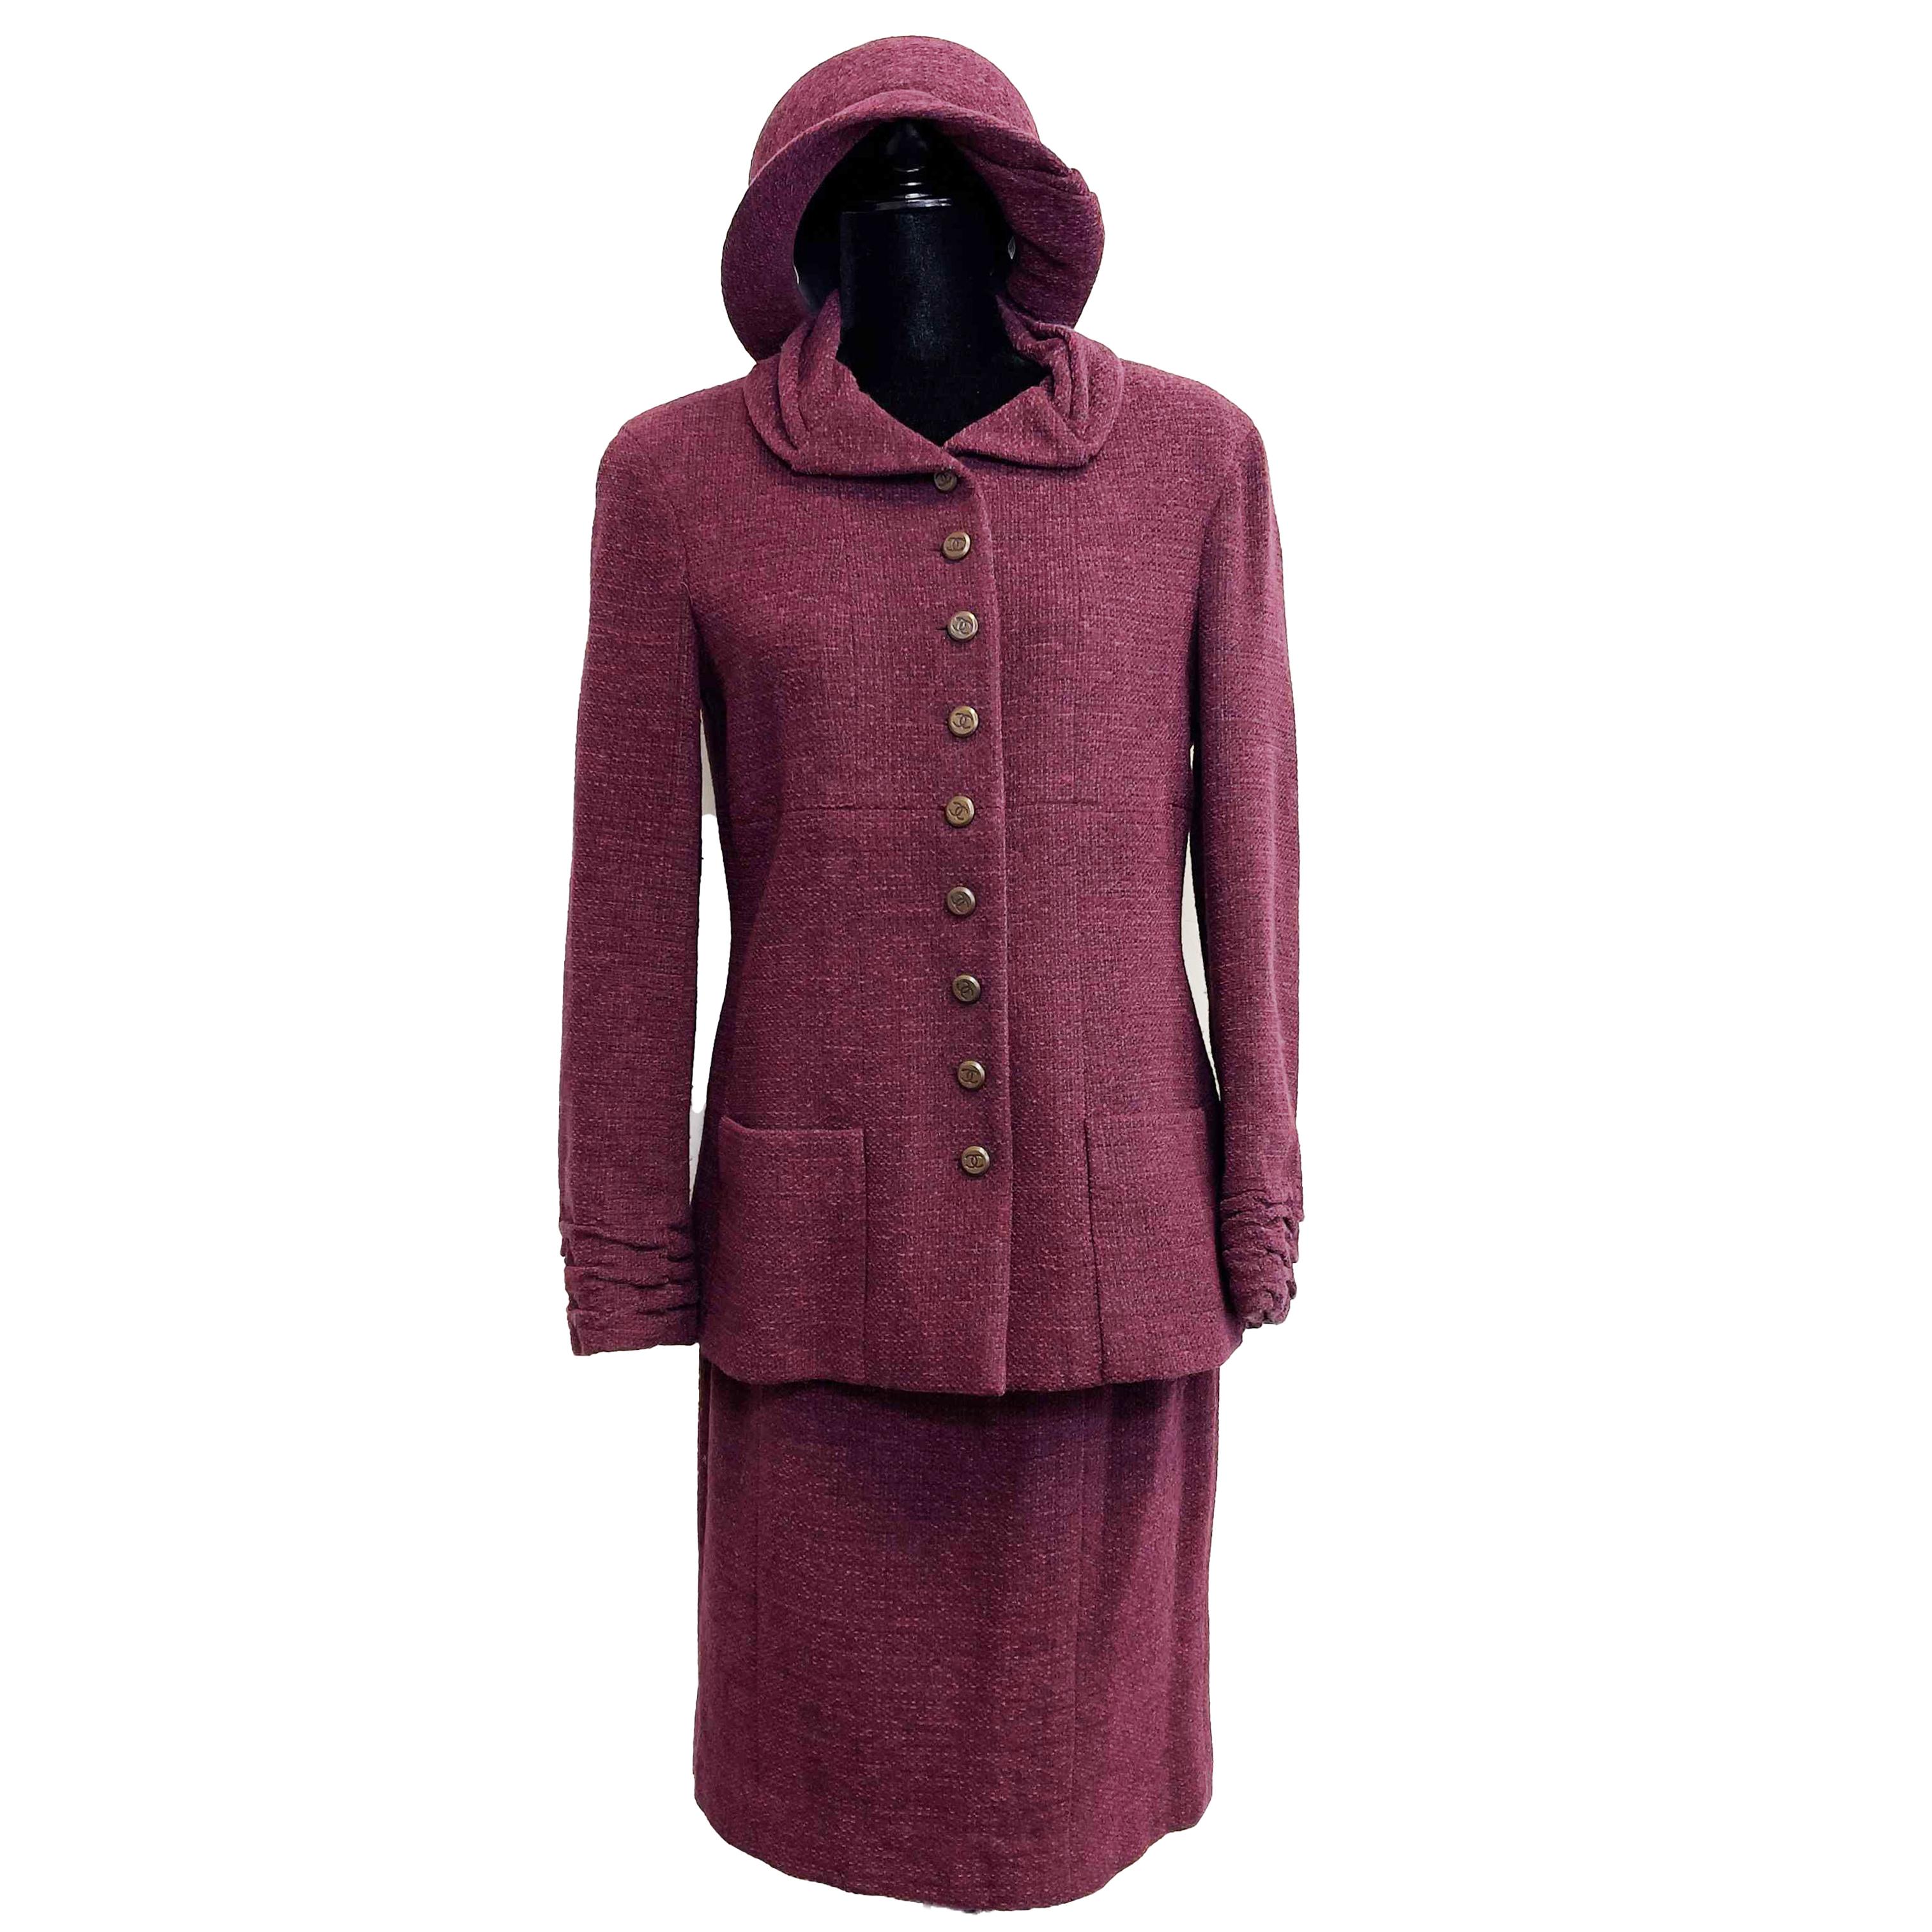 CHANEL- 98A 3 Piece Set - Boucle Hat / Jacket / Skirt - Mulberry - Size 40 US 8 For Sale 3